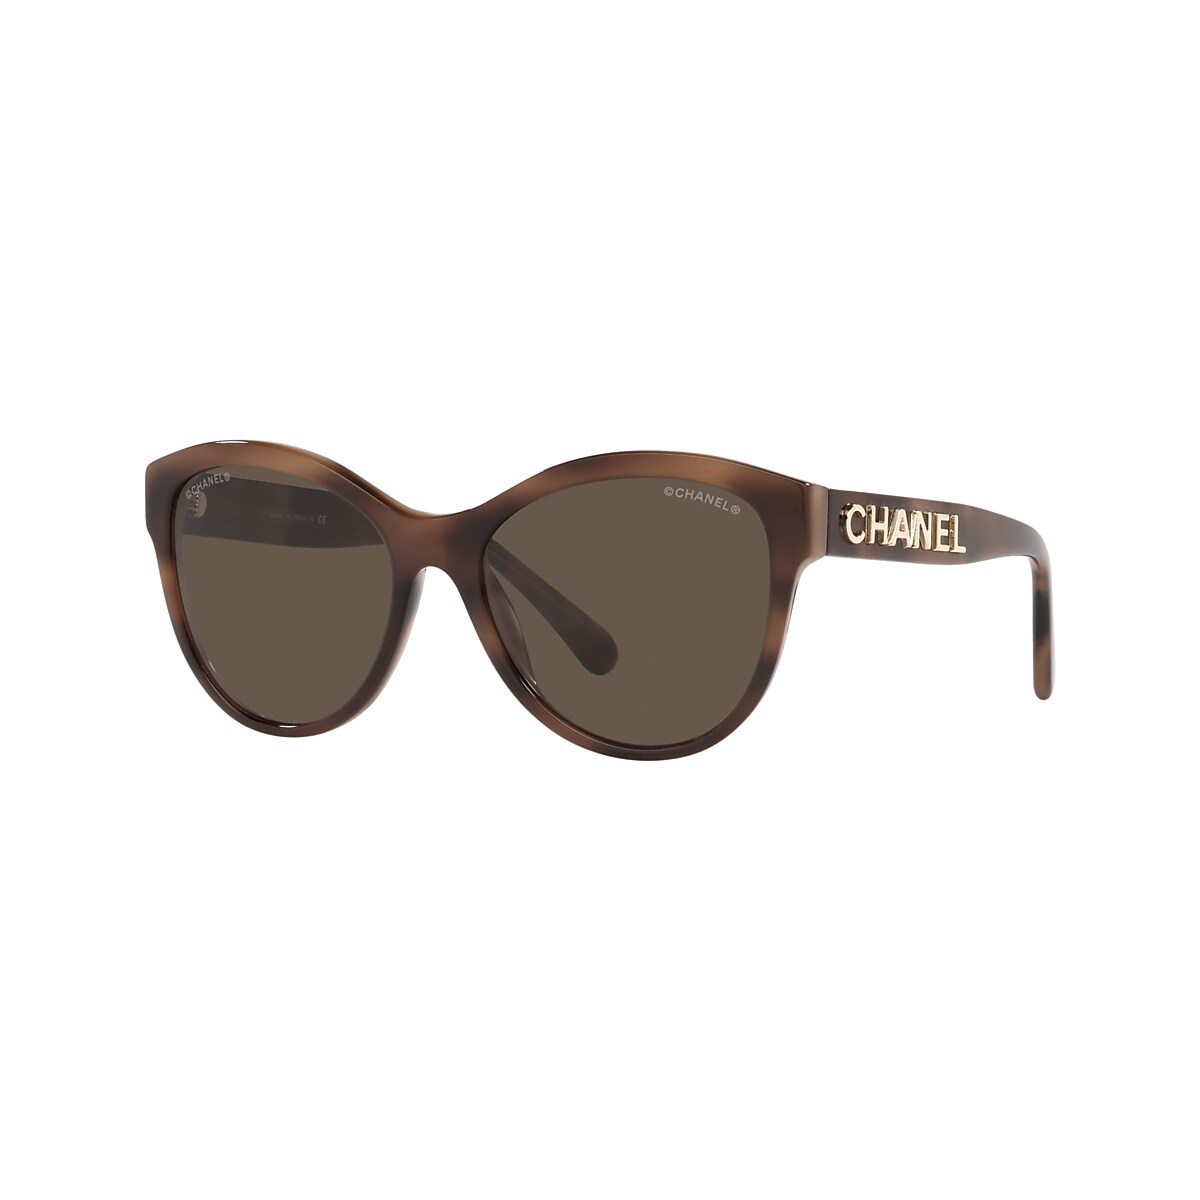 Chanel Butterfly Sunglasses CH5458 55 Brown & Tortoise Sunglasses